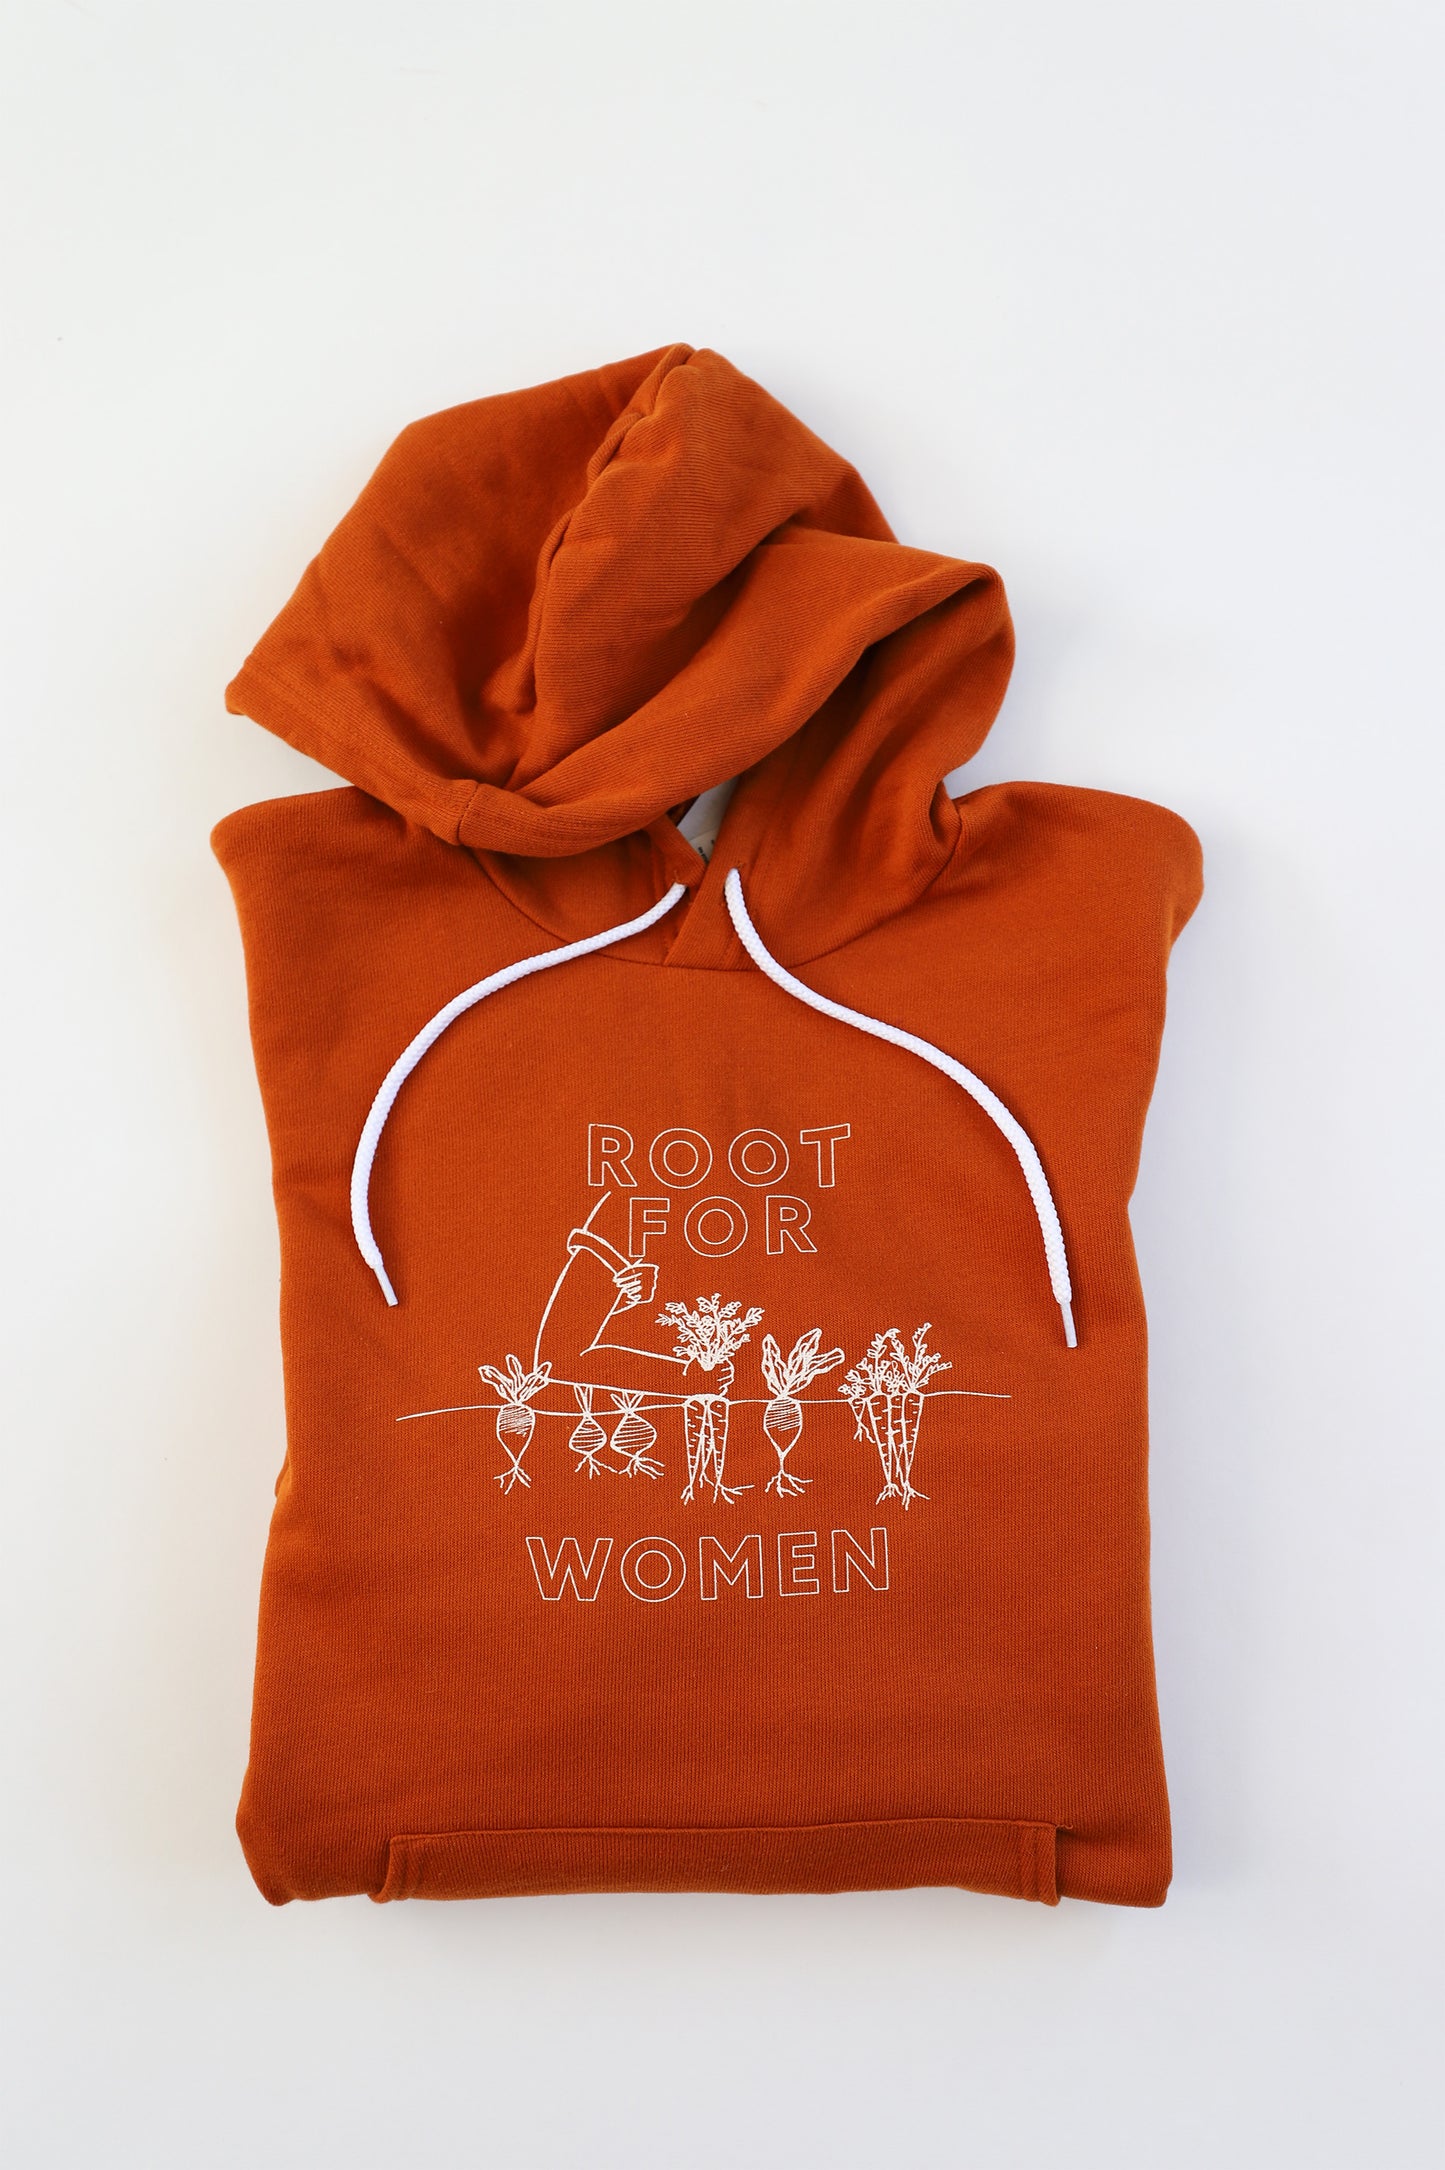 A folded orange hoodie reads "Root for Women" in white block letters